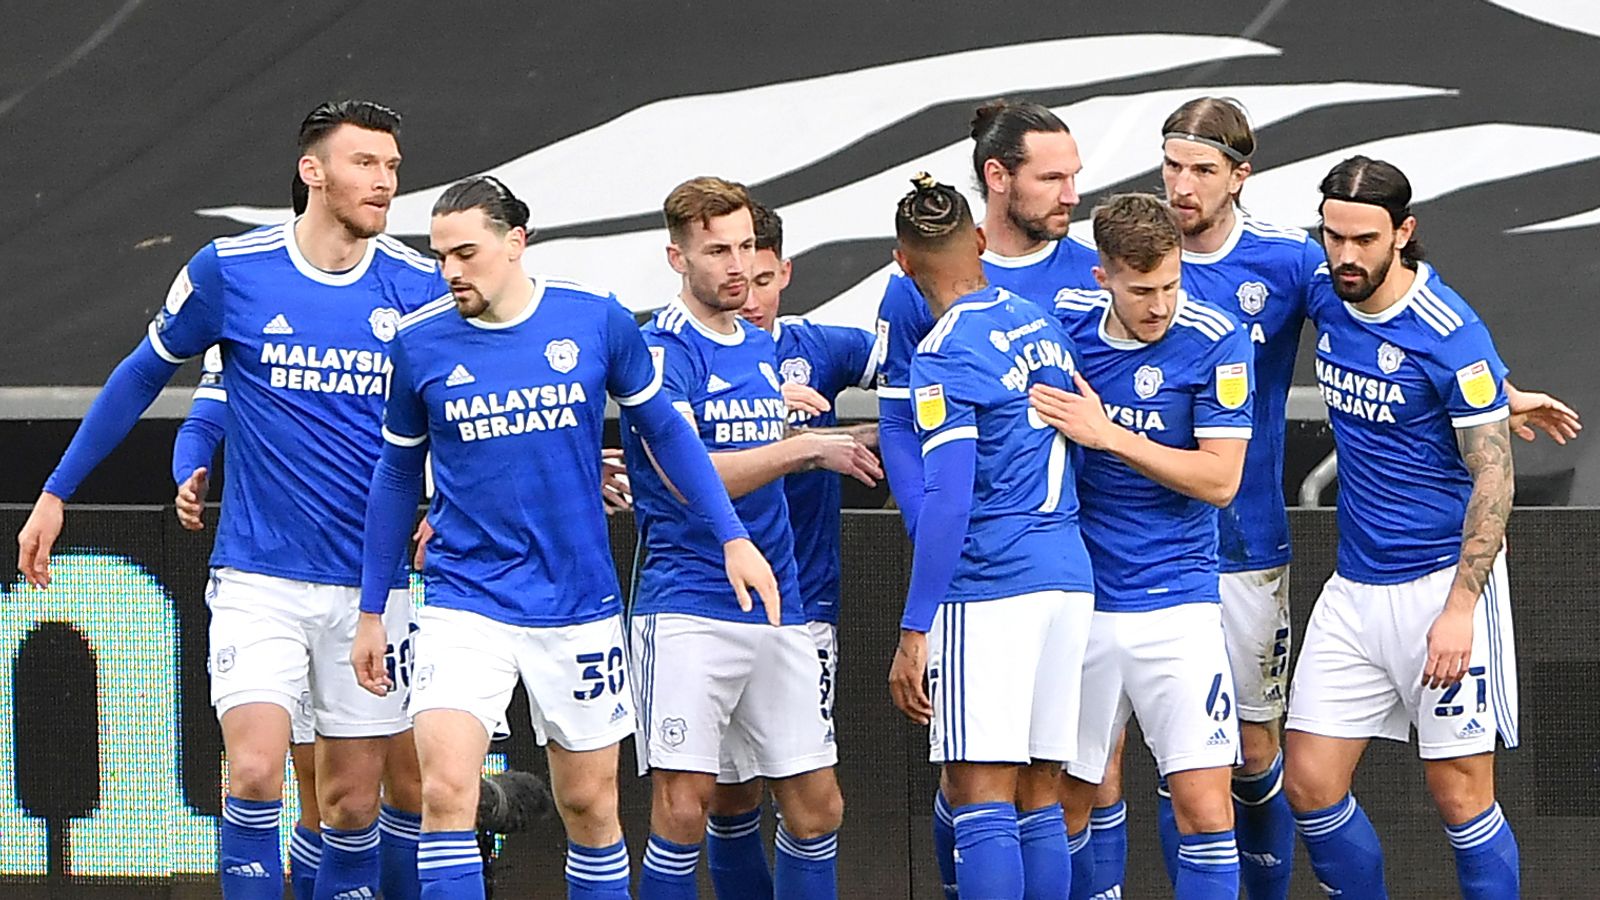 According to BBC report: Everton’s worst problems were revealed after 65 minutes when the action failed